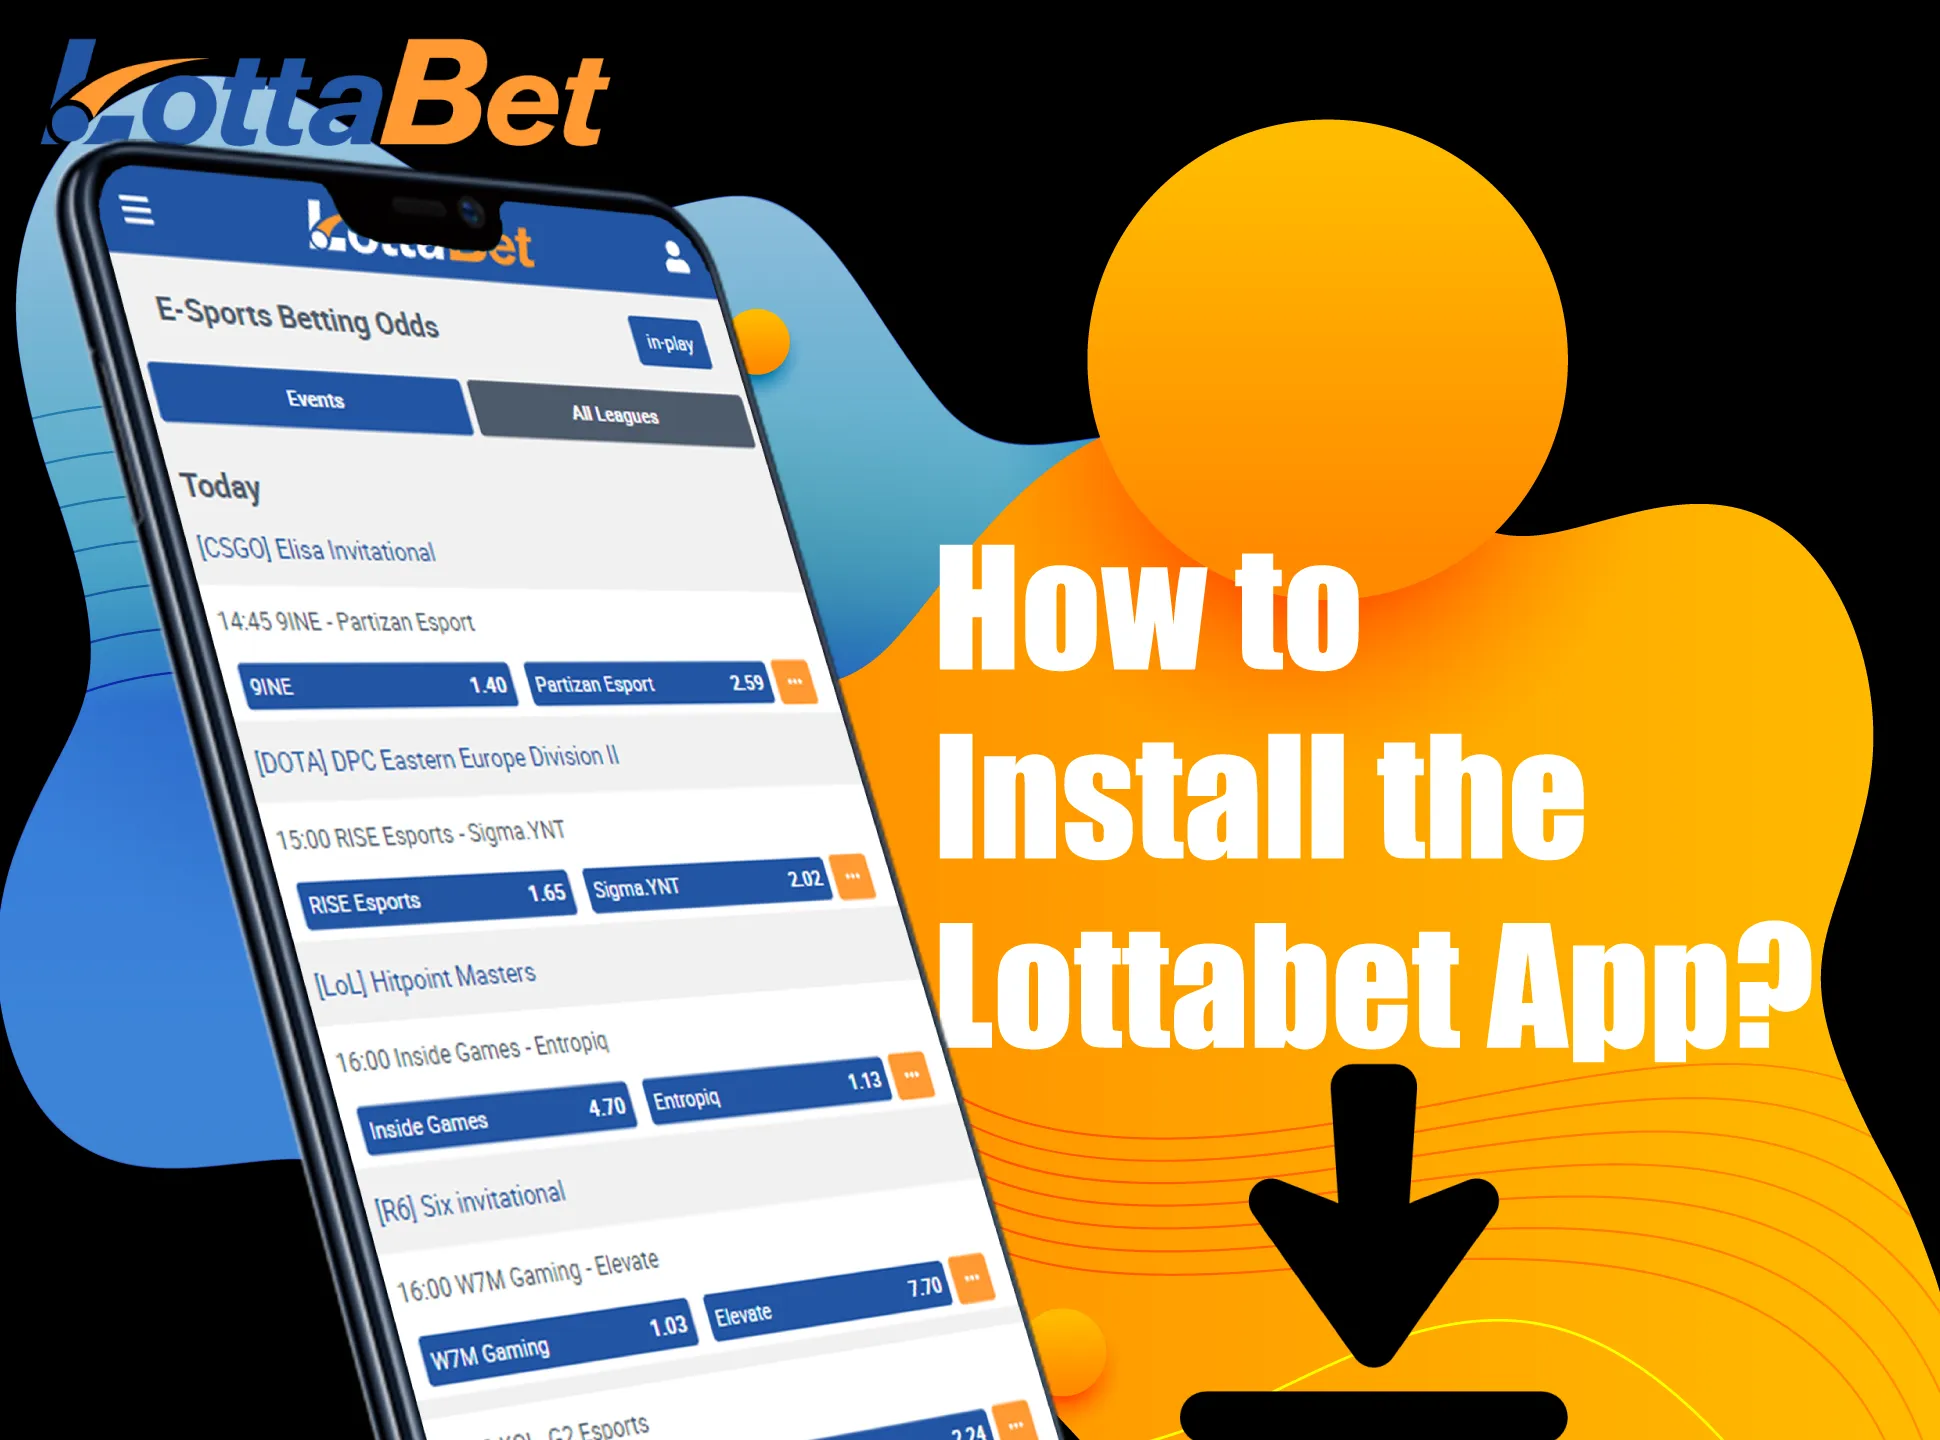 Install the Lottabet app on your smartphone to place bets whenever you wnat.